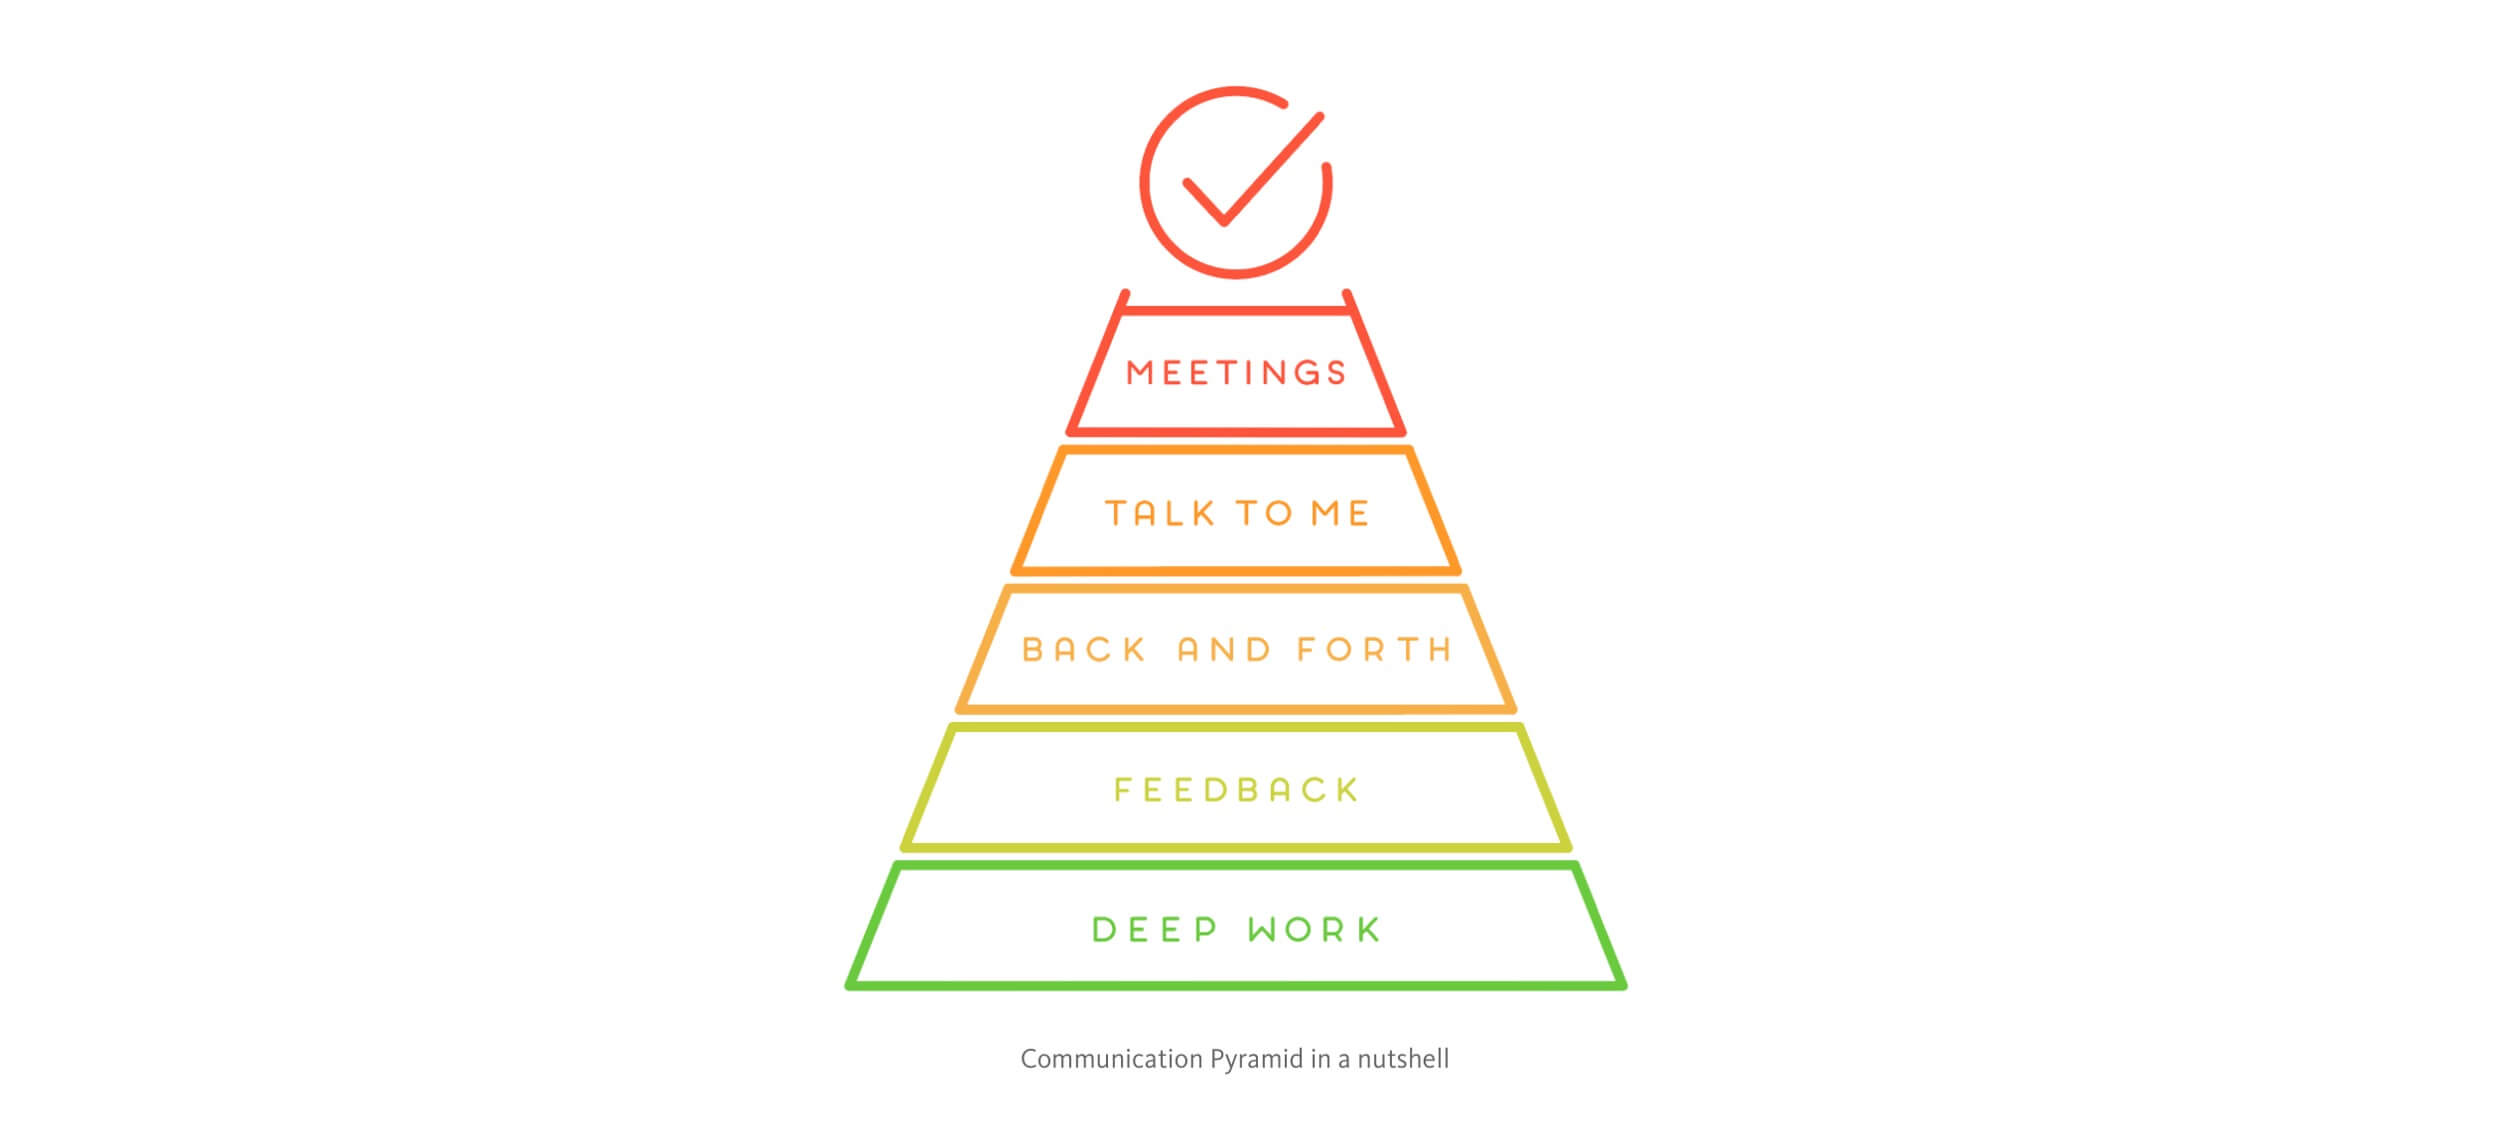 My Company’s Pyramid Of Communication Revisited